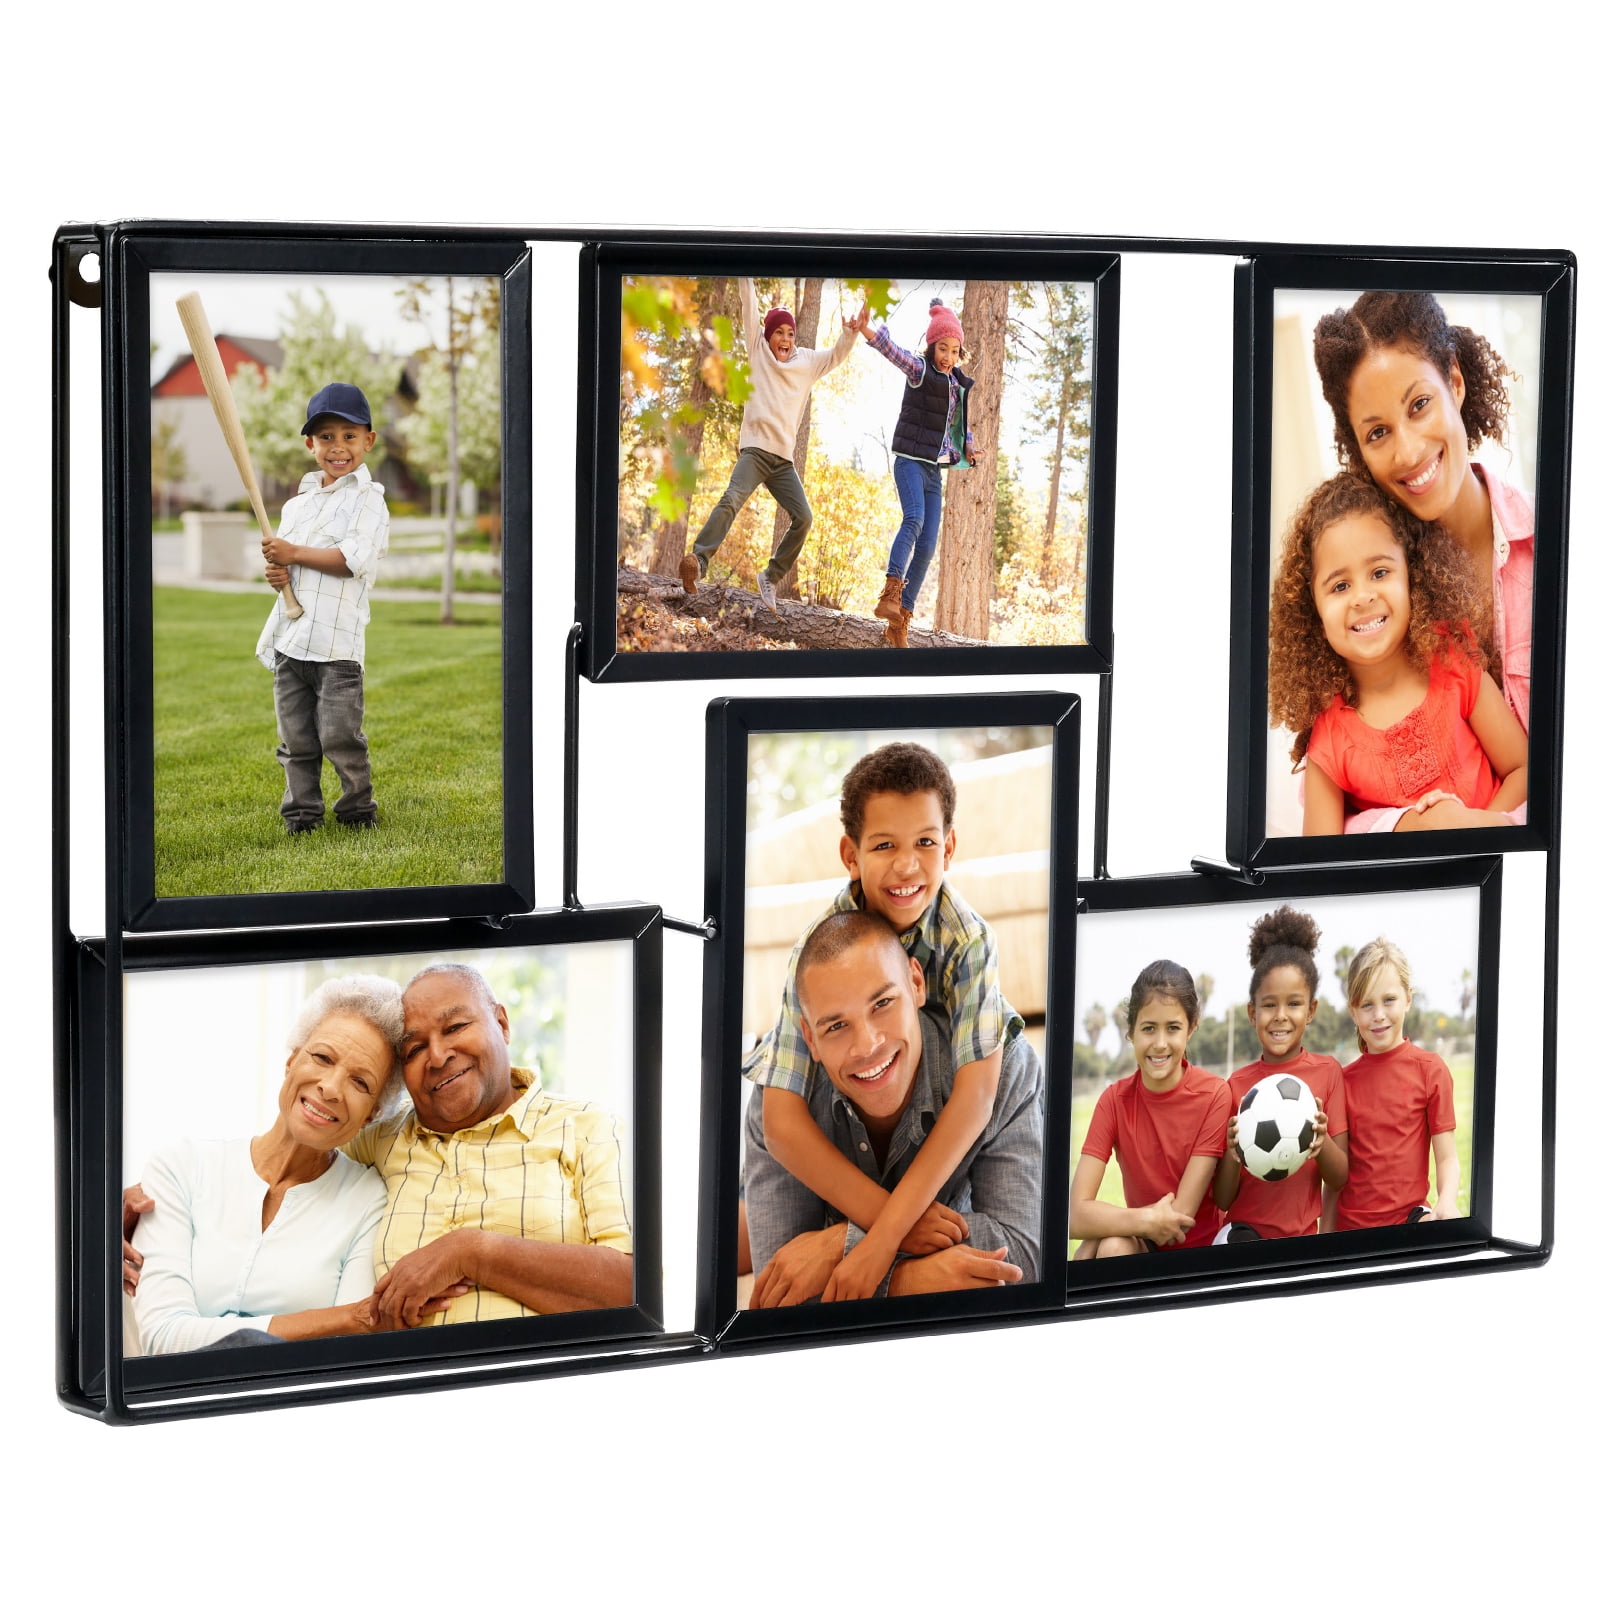 Mainstays 8-Opening Plaque Black Wall Collage Frame (Holds 6-4x6 inch & 2-4x4 inch Photos), Size: 16 x 18.5